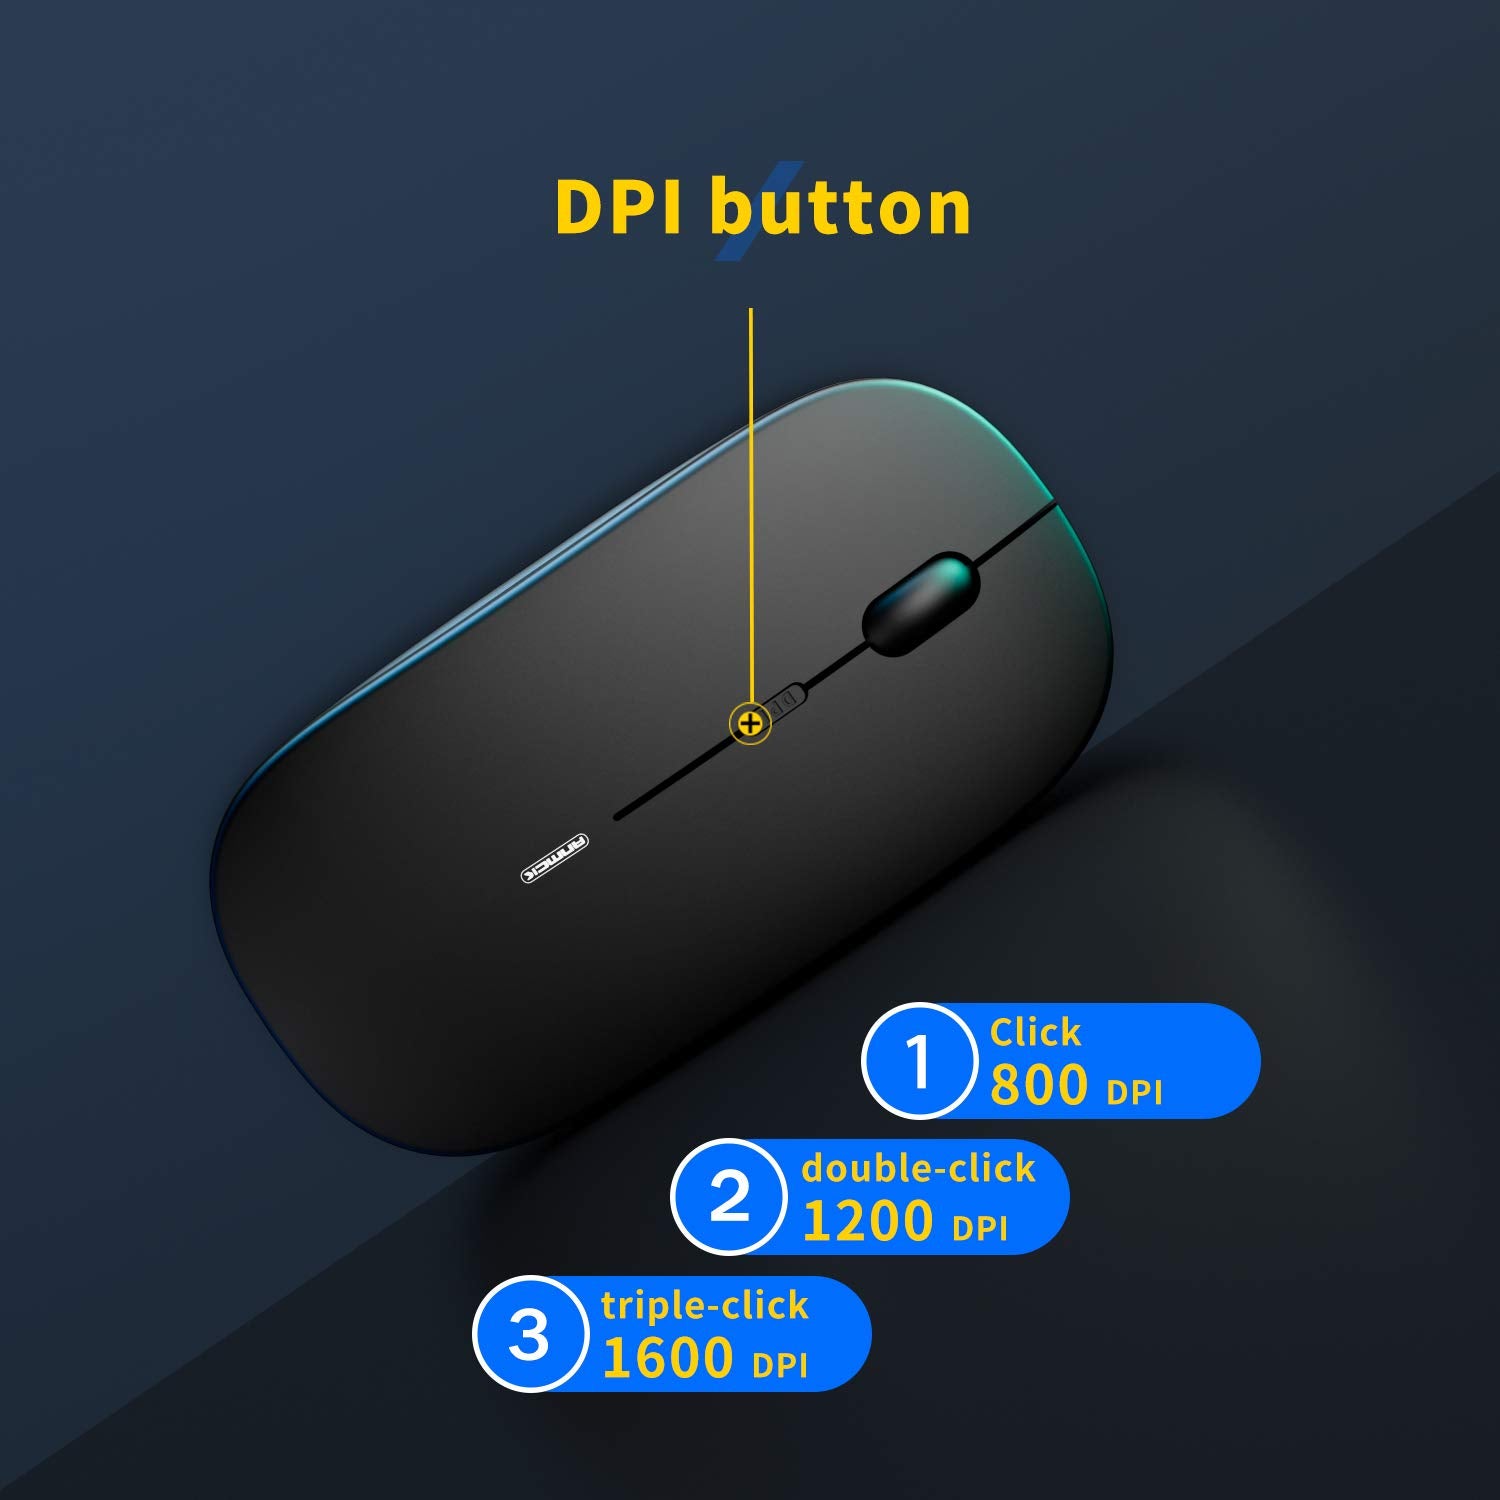 Wireless Silent Mouse,USB Laptop PC Cordless Mouse Rechargeable Slim Mice by Anmck,10m Remote Range,1600 DPI 3 Adjustment Levels Noiseless Mini Mouse ,Home & Office for Windows,MAC OS and Linux-Black